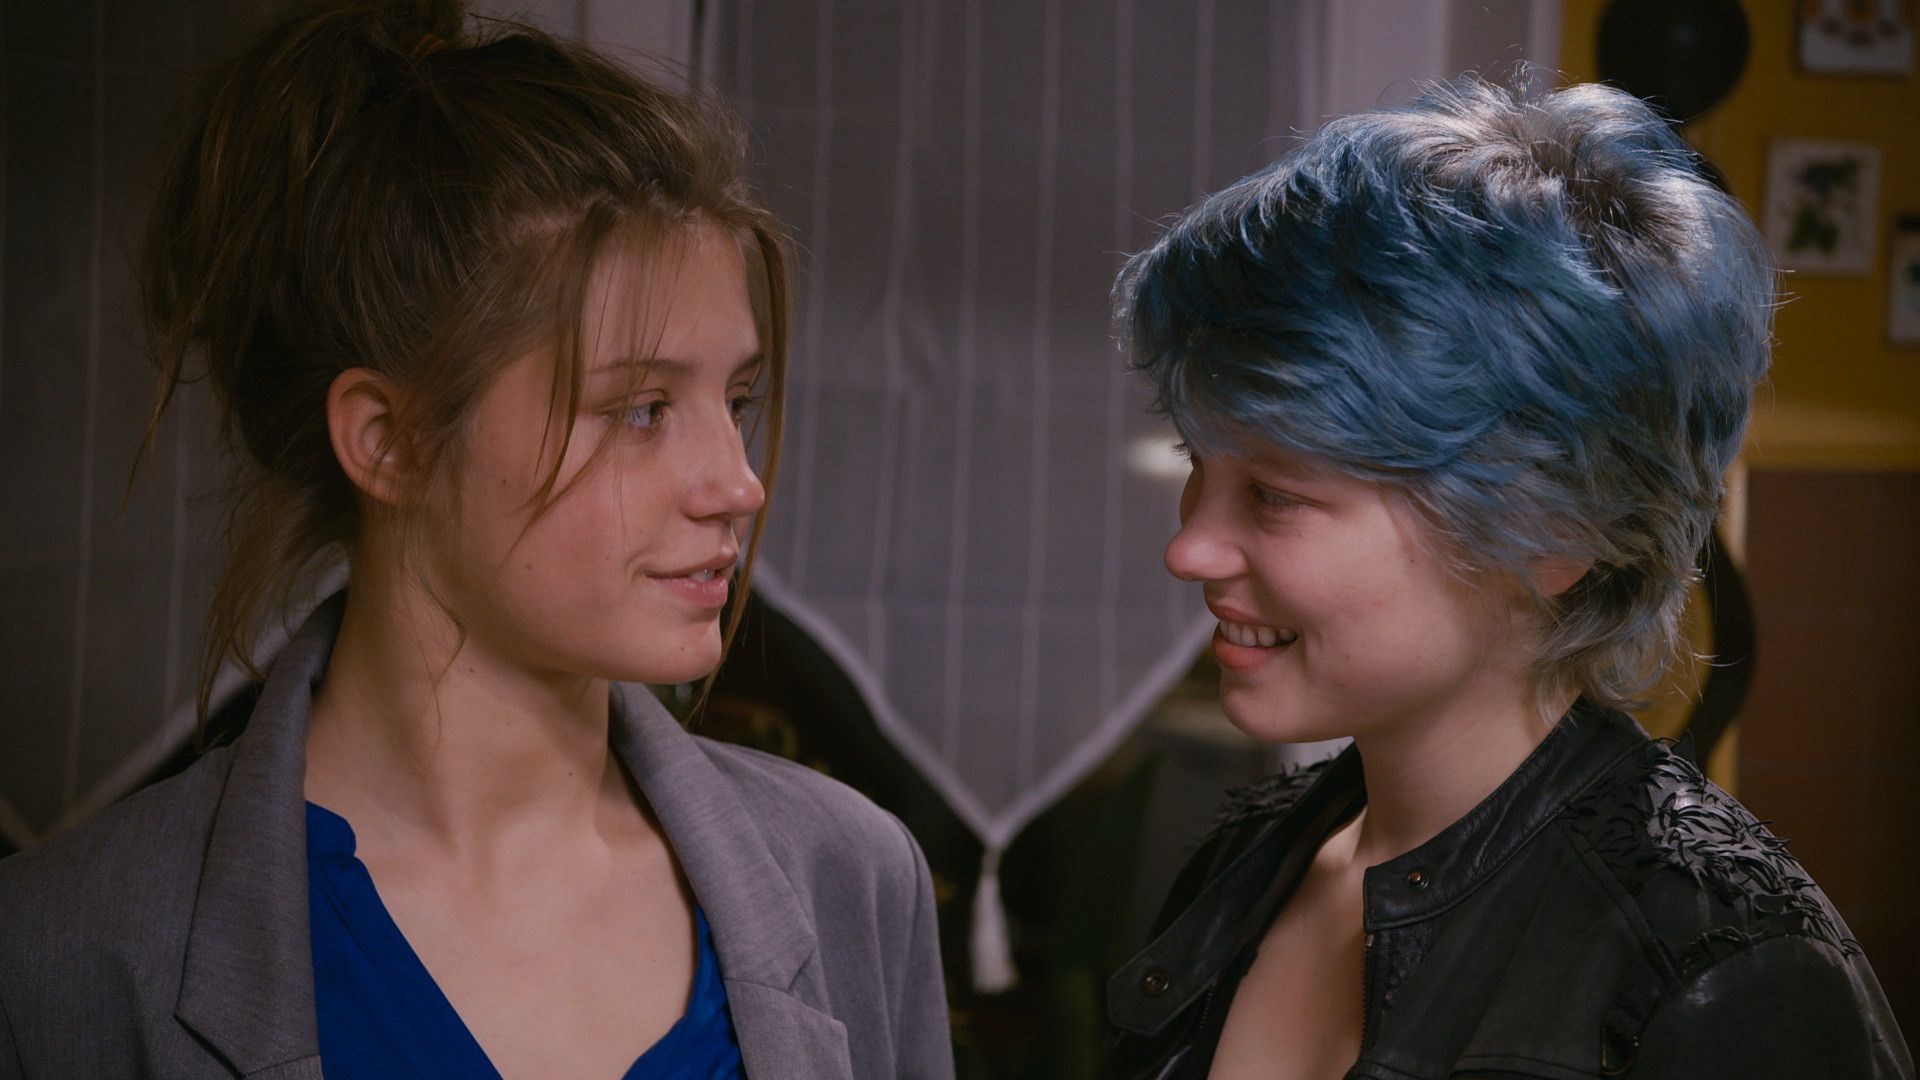 Blue Is the Warmest Color and Emma Is the Warmest